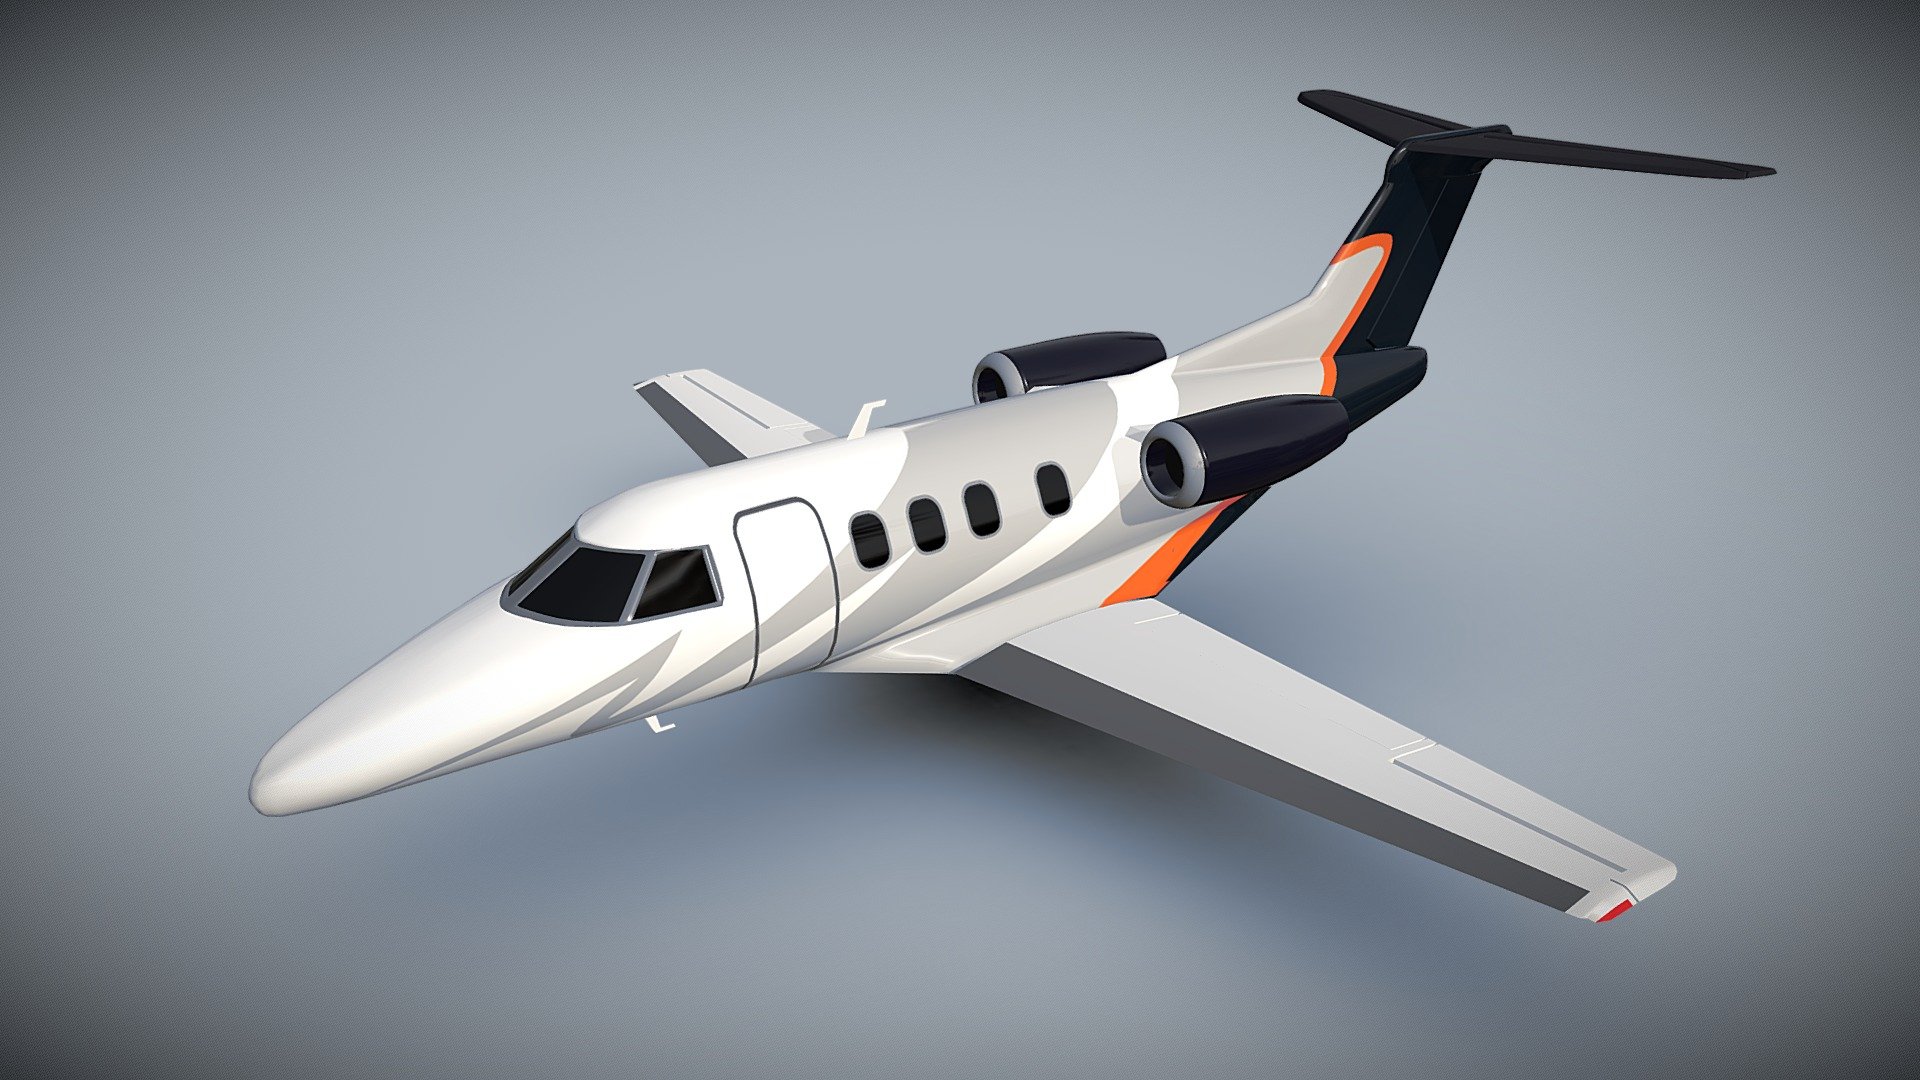 This 3d model was made with blender3d 2.74 version.Renderings were created with blender internal render.There is one uv mapped texture projected from side view 2050x2050 png file with doors,windows and stripe details.There are no interior and no landing gear objects.Objects named by material and by object.All elevators and rudder are detached,but not rigged by axis.Renderings were created with subdivision 2,until I have exported my product with subdivision 1.Enjoy my product.

3ds file verts: 52164 polys: 17388

obj file verts: 9798 polys: 17388

Checked with GLC viewer - Embraer Phenom 100 lowpoly private jet - Buy Royalty Free 3D model by koleos3d 3d model